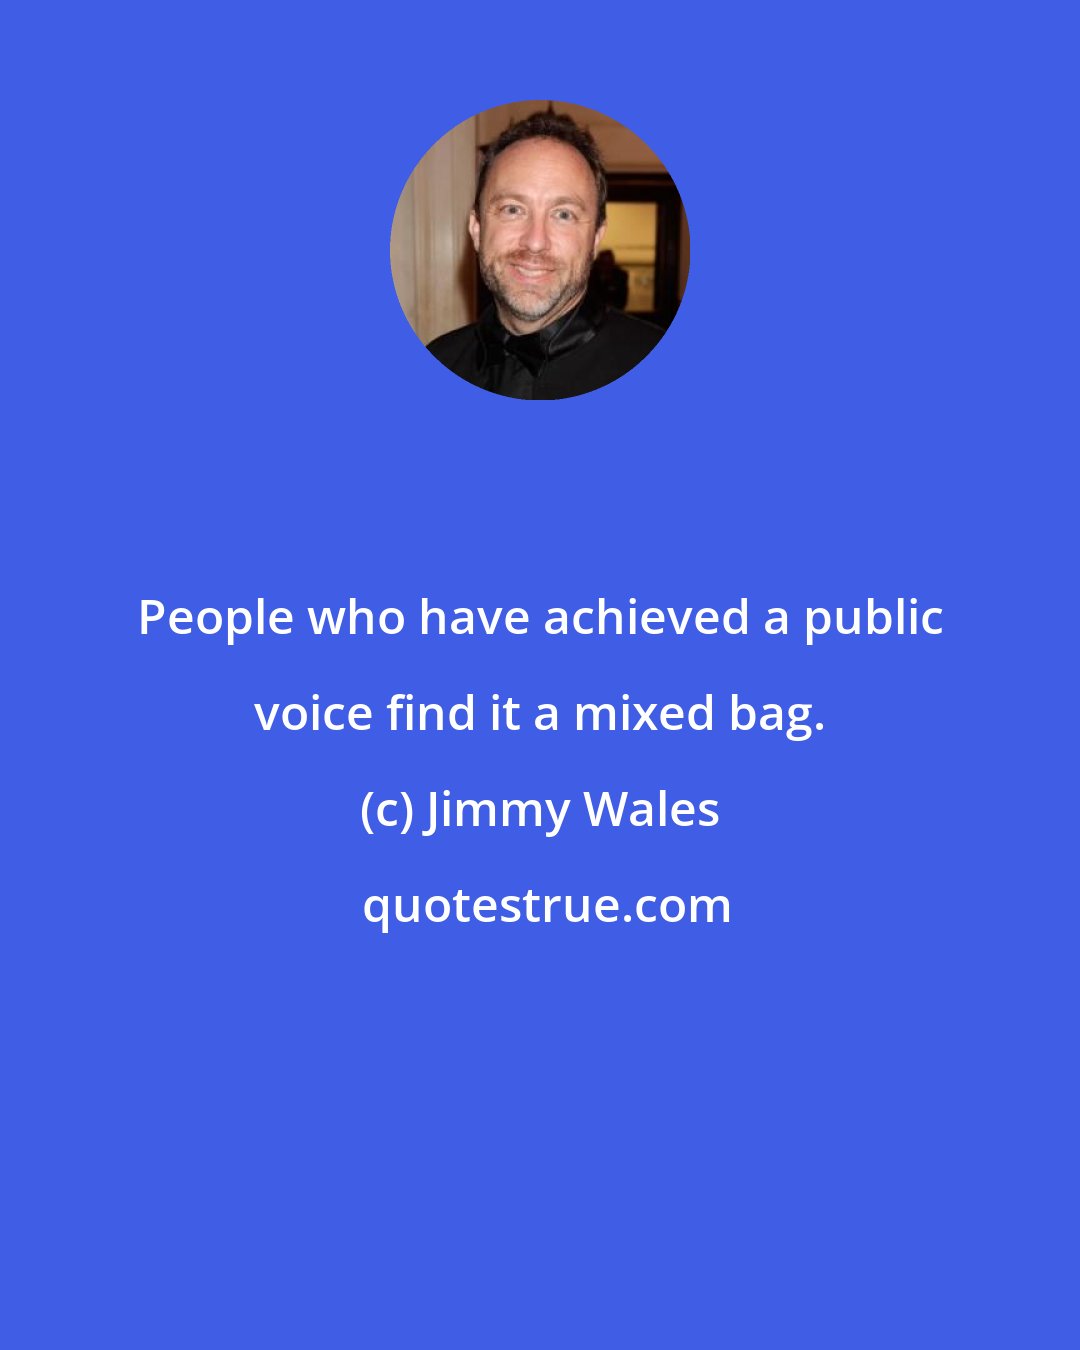 Jimmy Wales: People who have achieved a public voice find it a mixed bag.